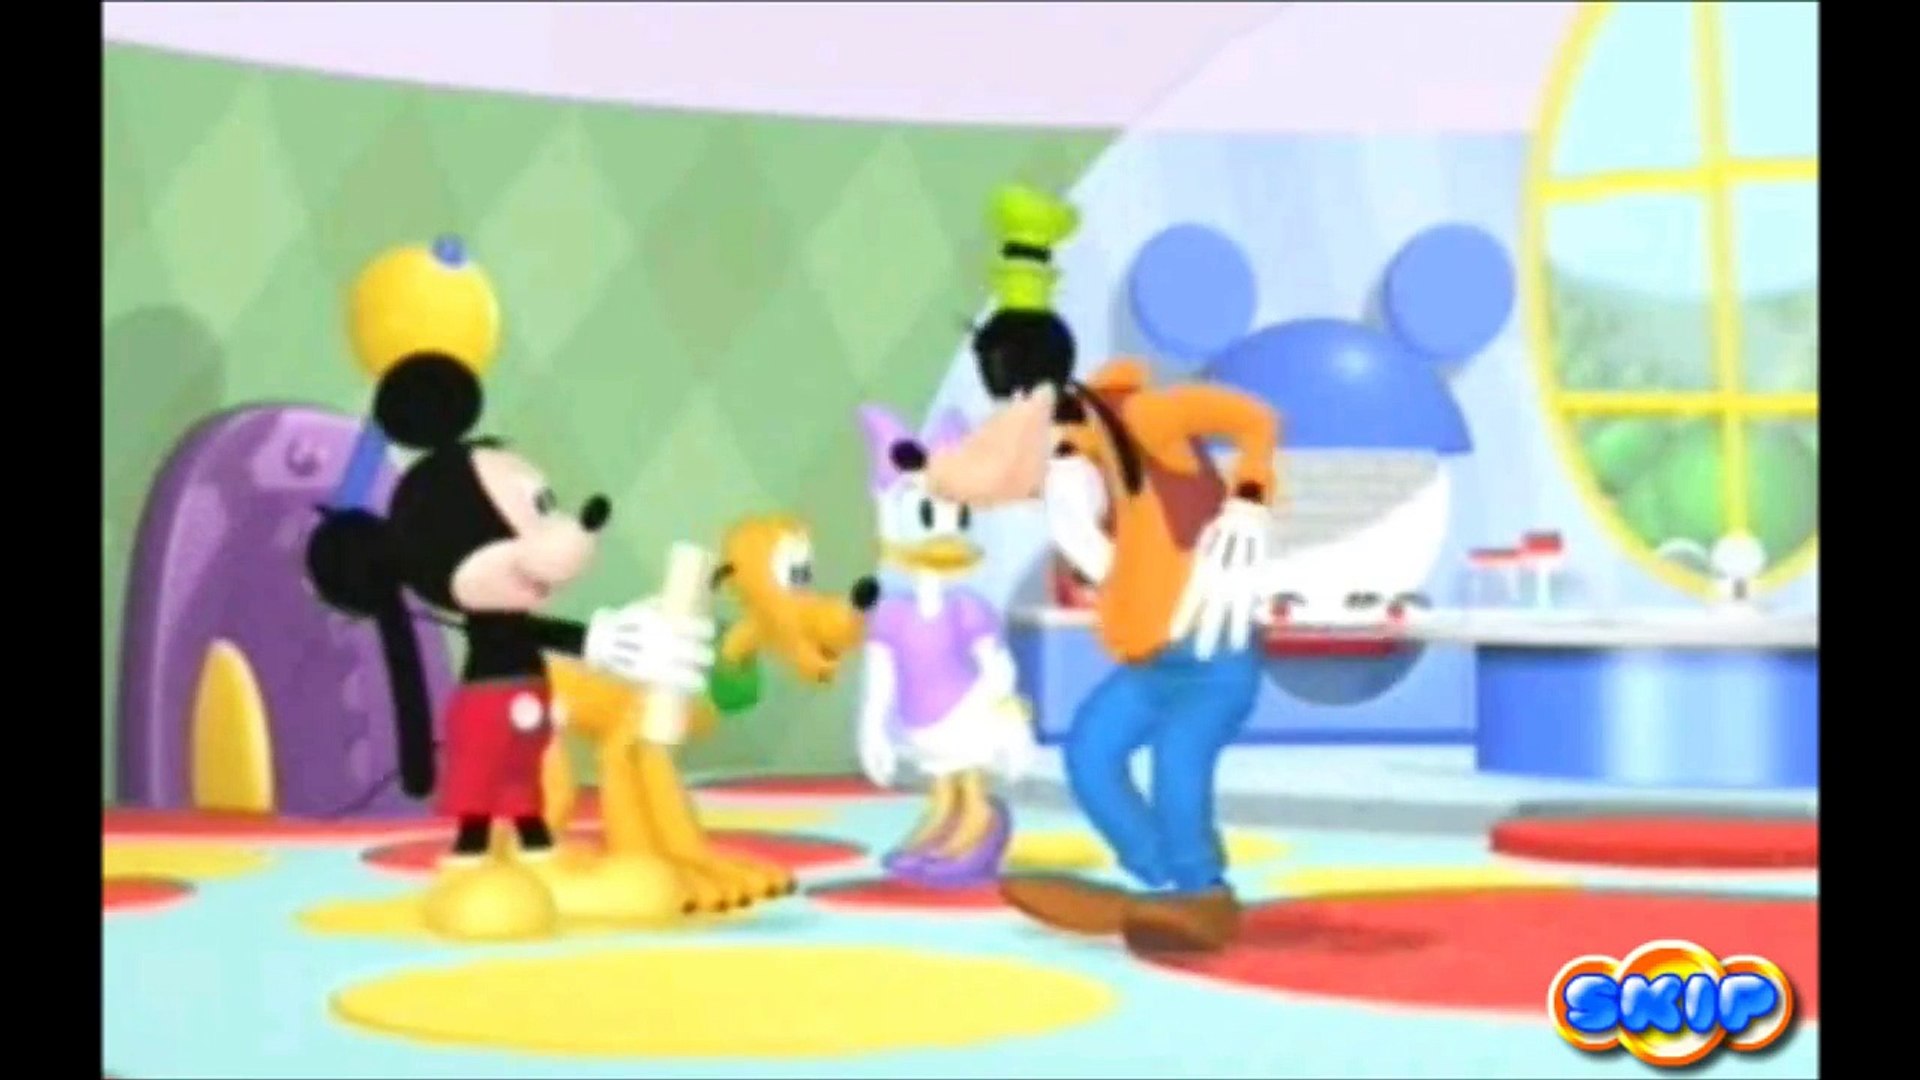 Mickey Mouse Clubhouse Full Episodes Mickey Mouse Clubhouse Sea Captain  Episodes 1 New Games 2020.mp4 - video Dailymotion